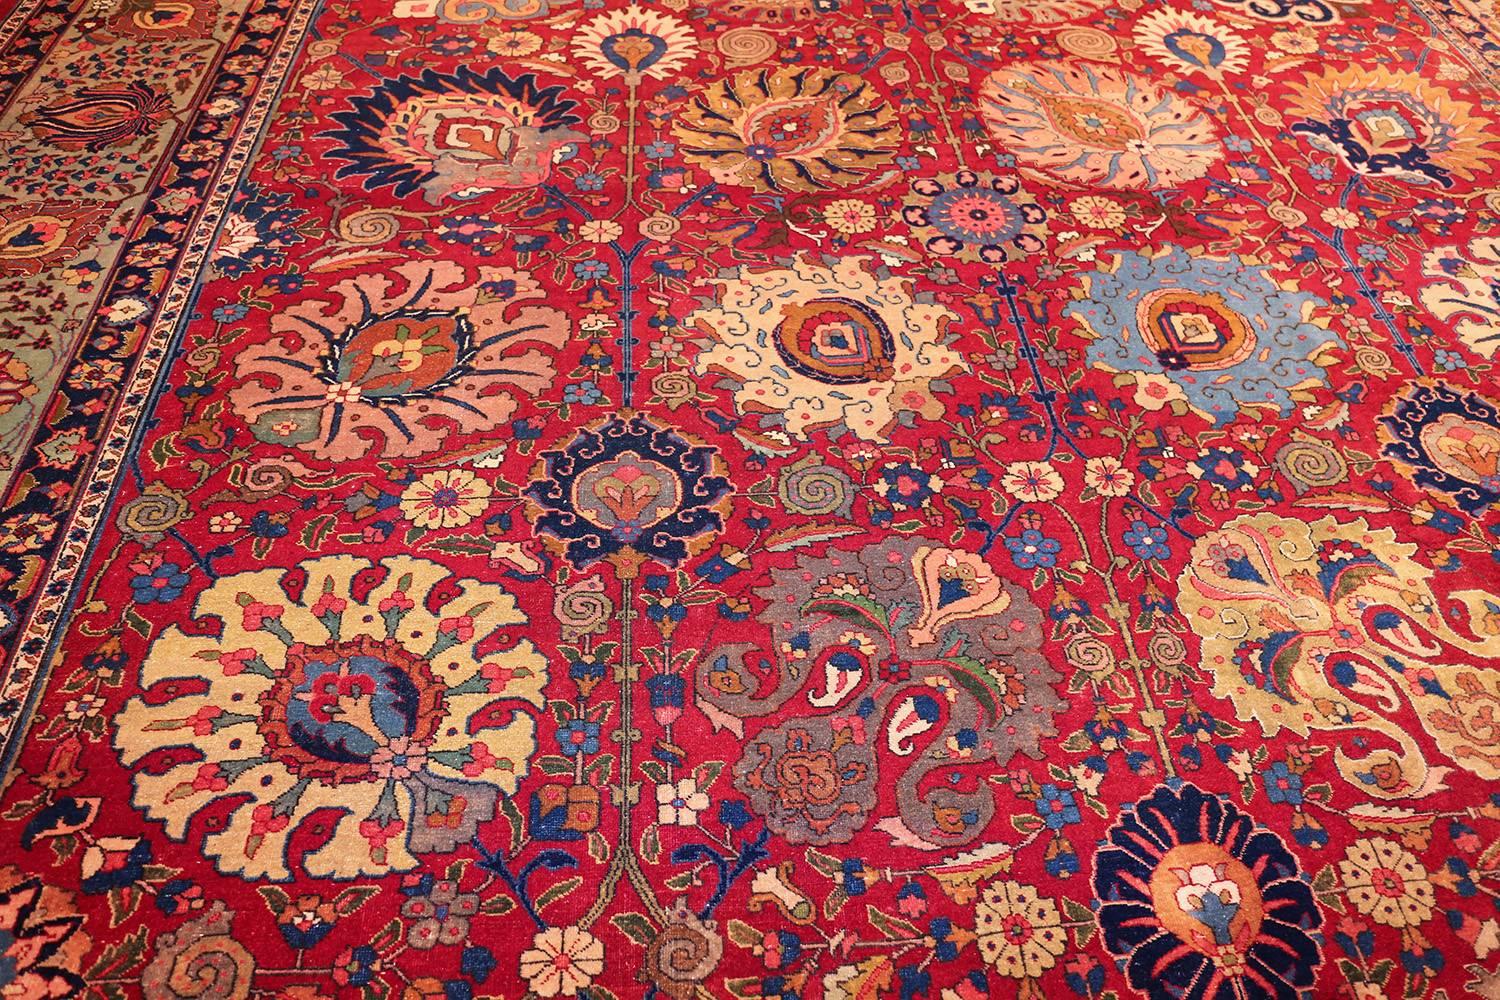 Beautiful Large Antique Vase Design Persian Tabriz Rug, Country of Origin / Rug type: Persian Rug, Circa Date: 1920 – Size: 12 ft 10 in x 19 ft 6 in (3.91 m x 5.94 m).